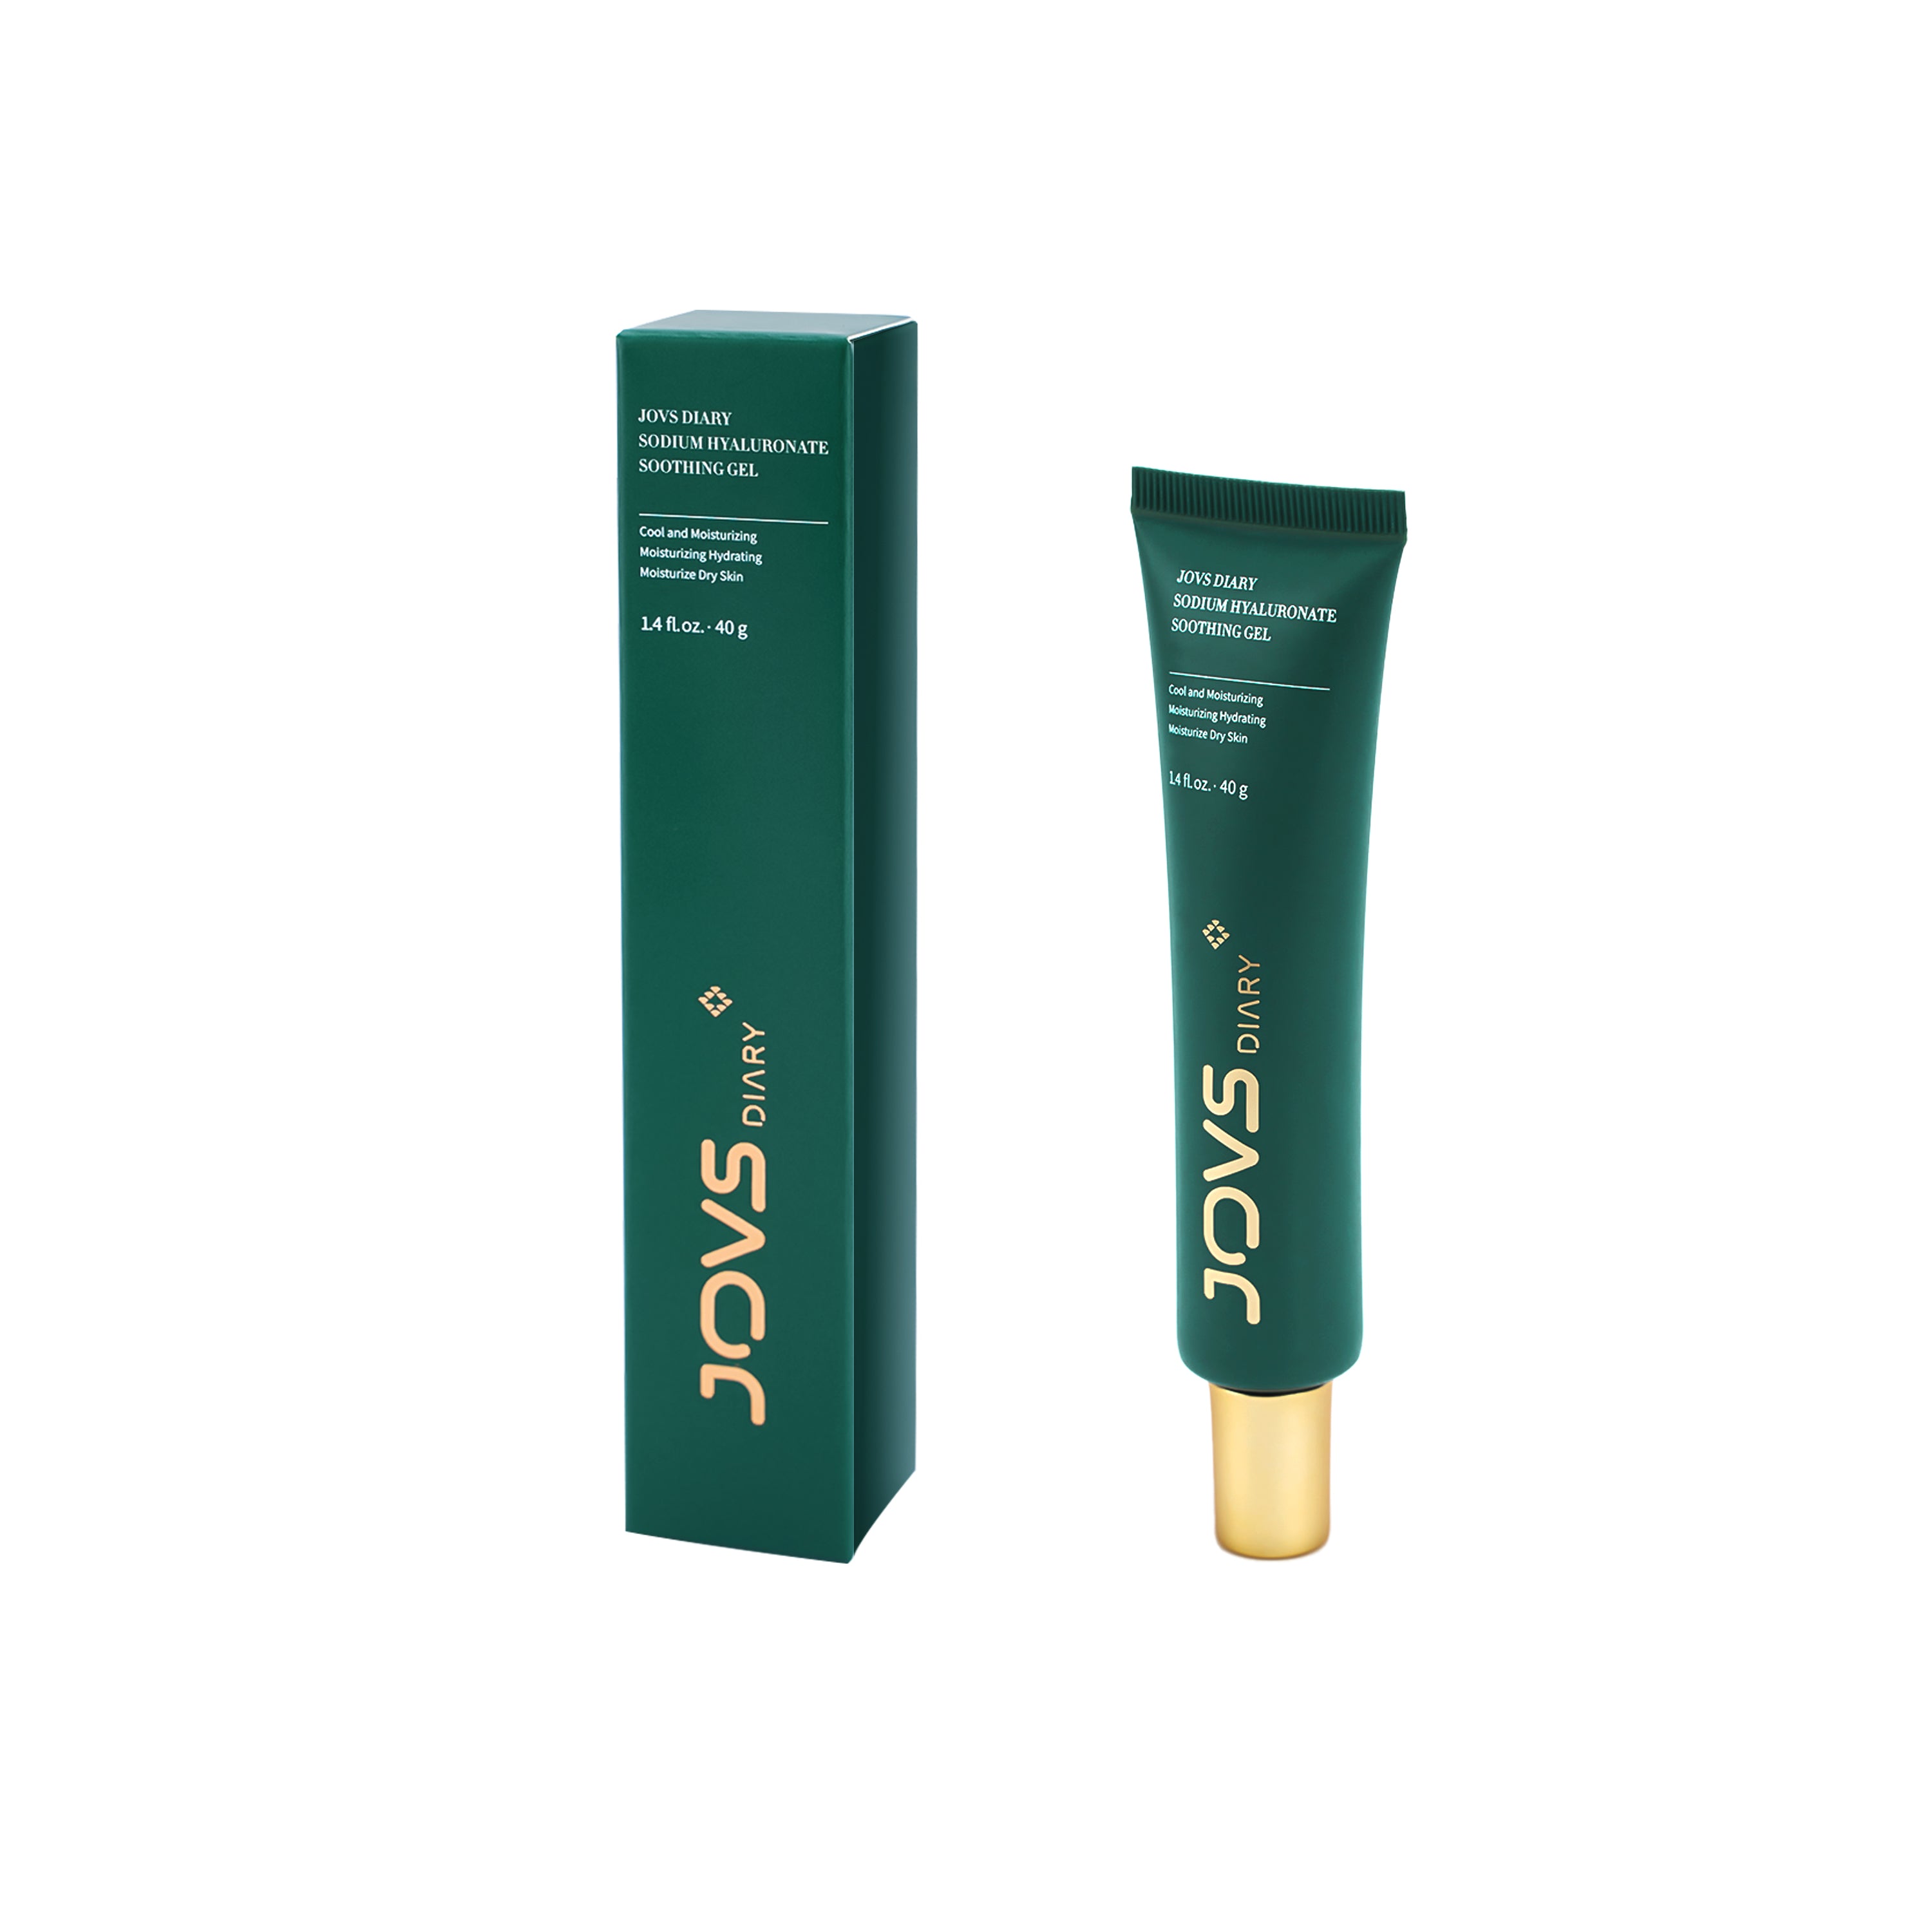 JOVS DIARY Sodium Hyaluronate Soothing Gel for deep hydration and soothing skin care.